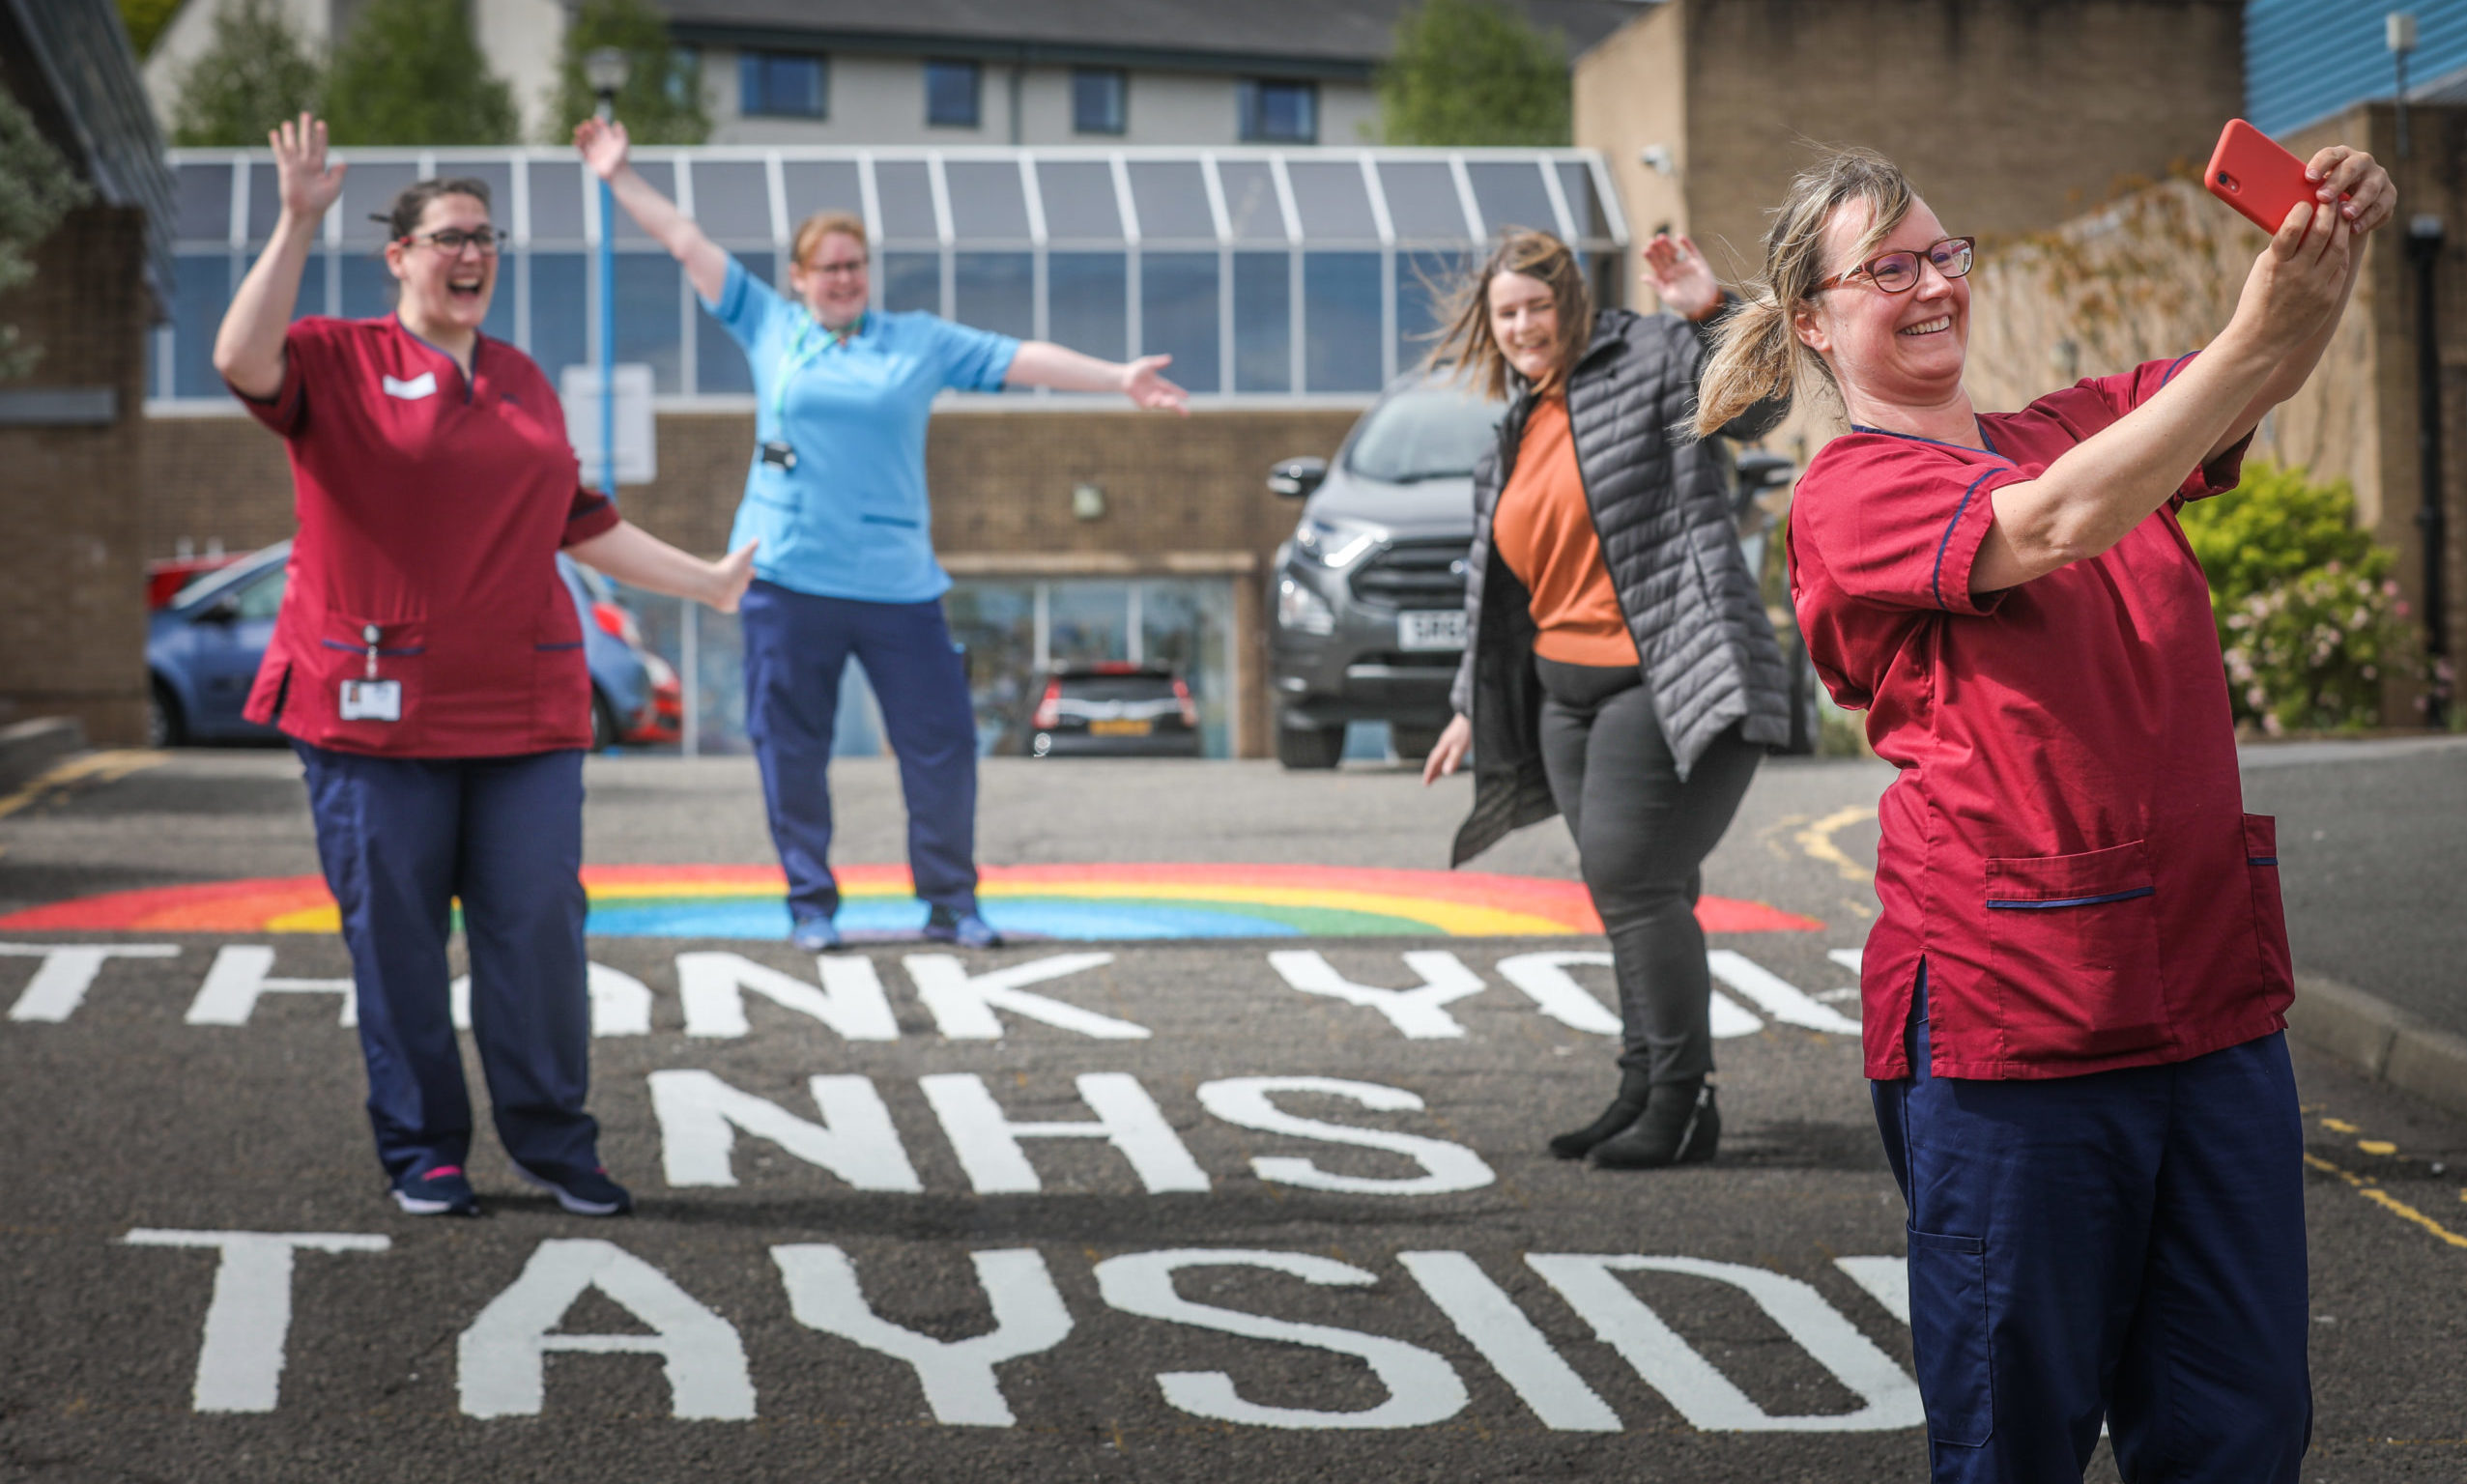 Staff take a photo with the new rainbow, left to right, Rachel Hunt, Senior Nurse, Pam Jaggard, Physio, Lynsey Laing of Wrightline Road Markings and front Gill Birrell, Senior Nurse. Tuesday 12th May, 2020.  Mhairi Edwards/DCT Media